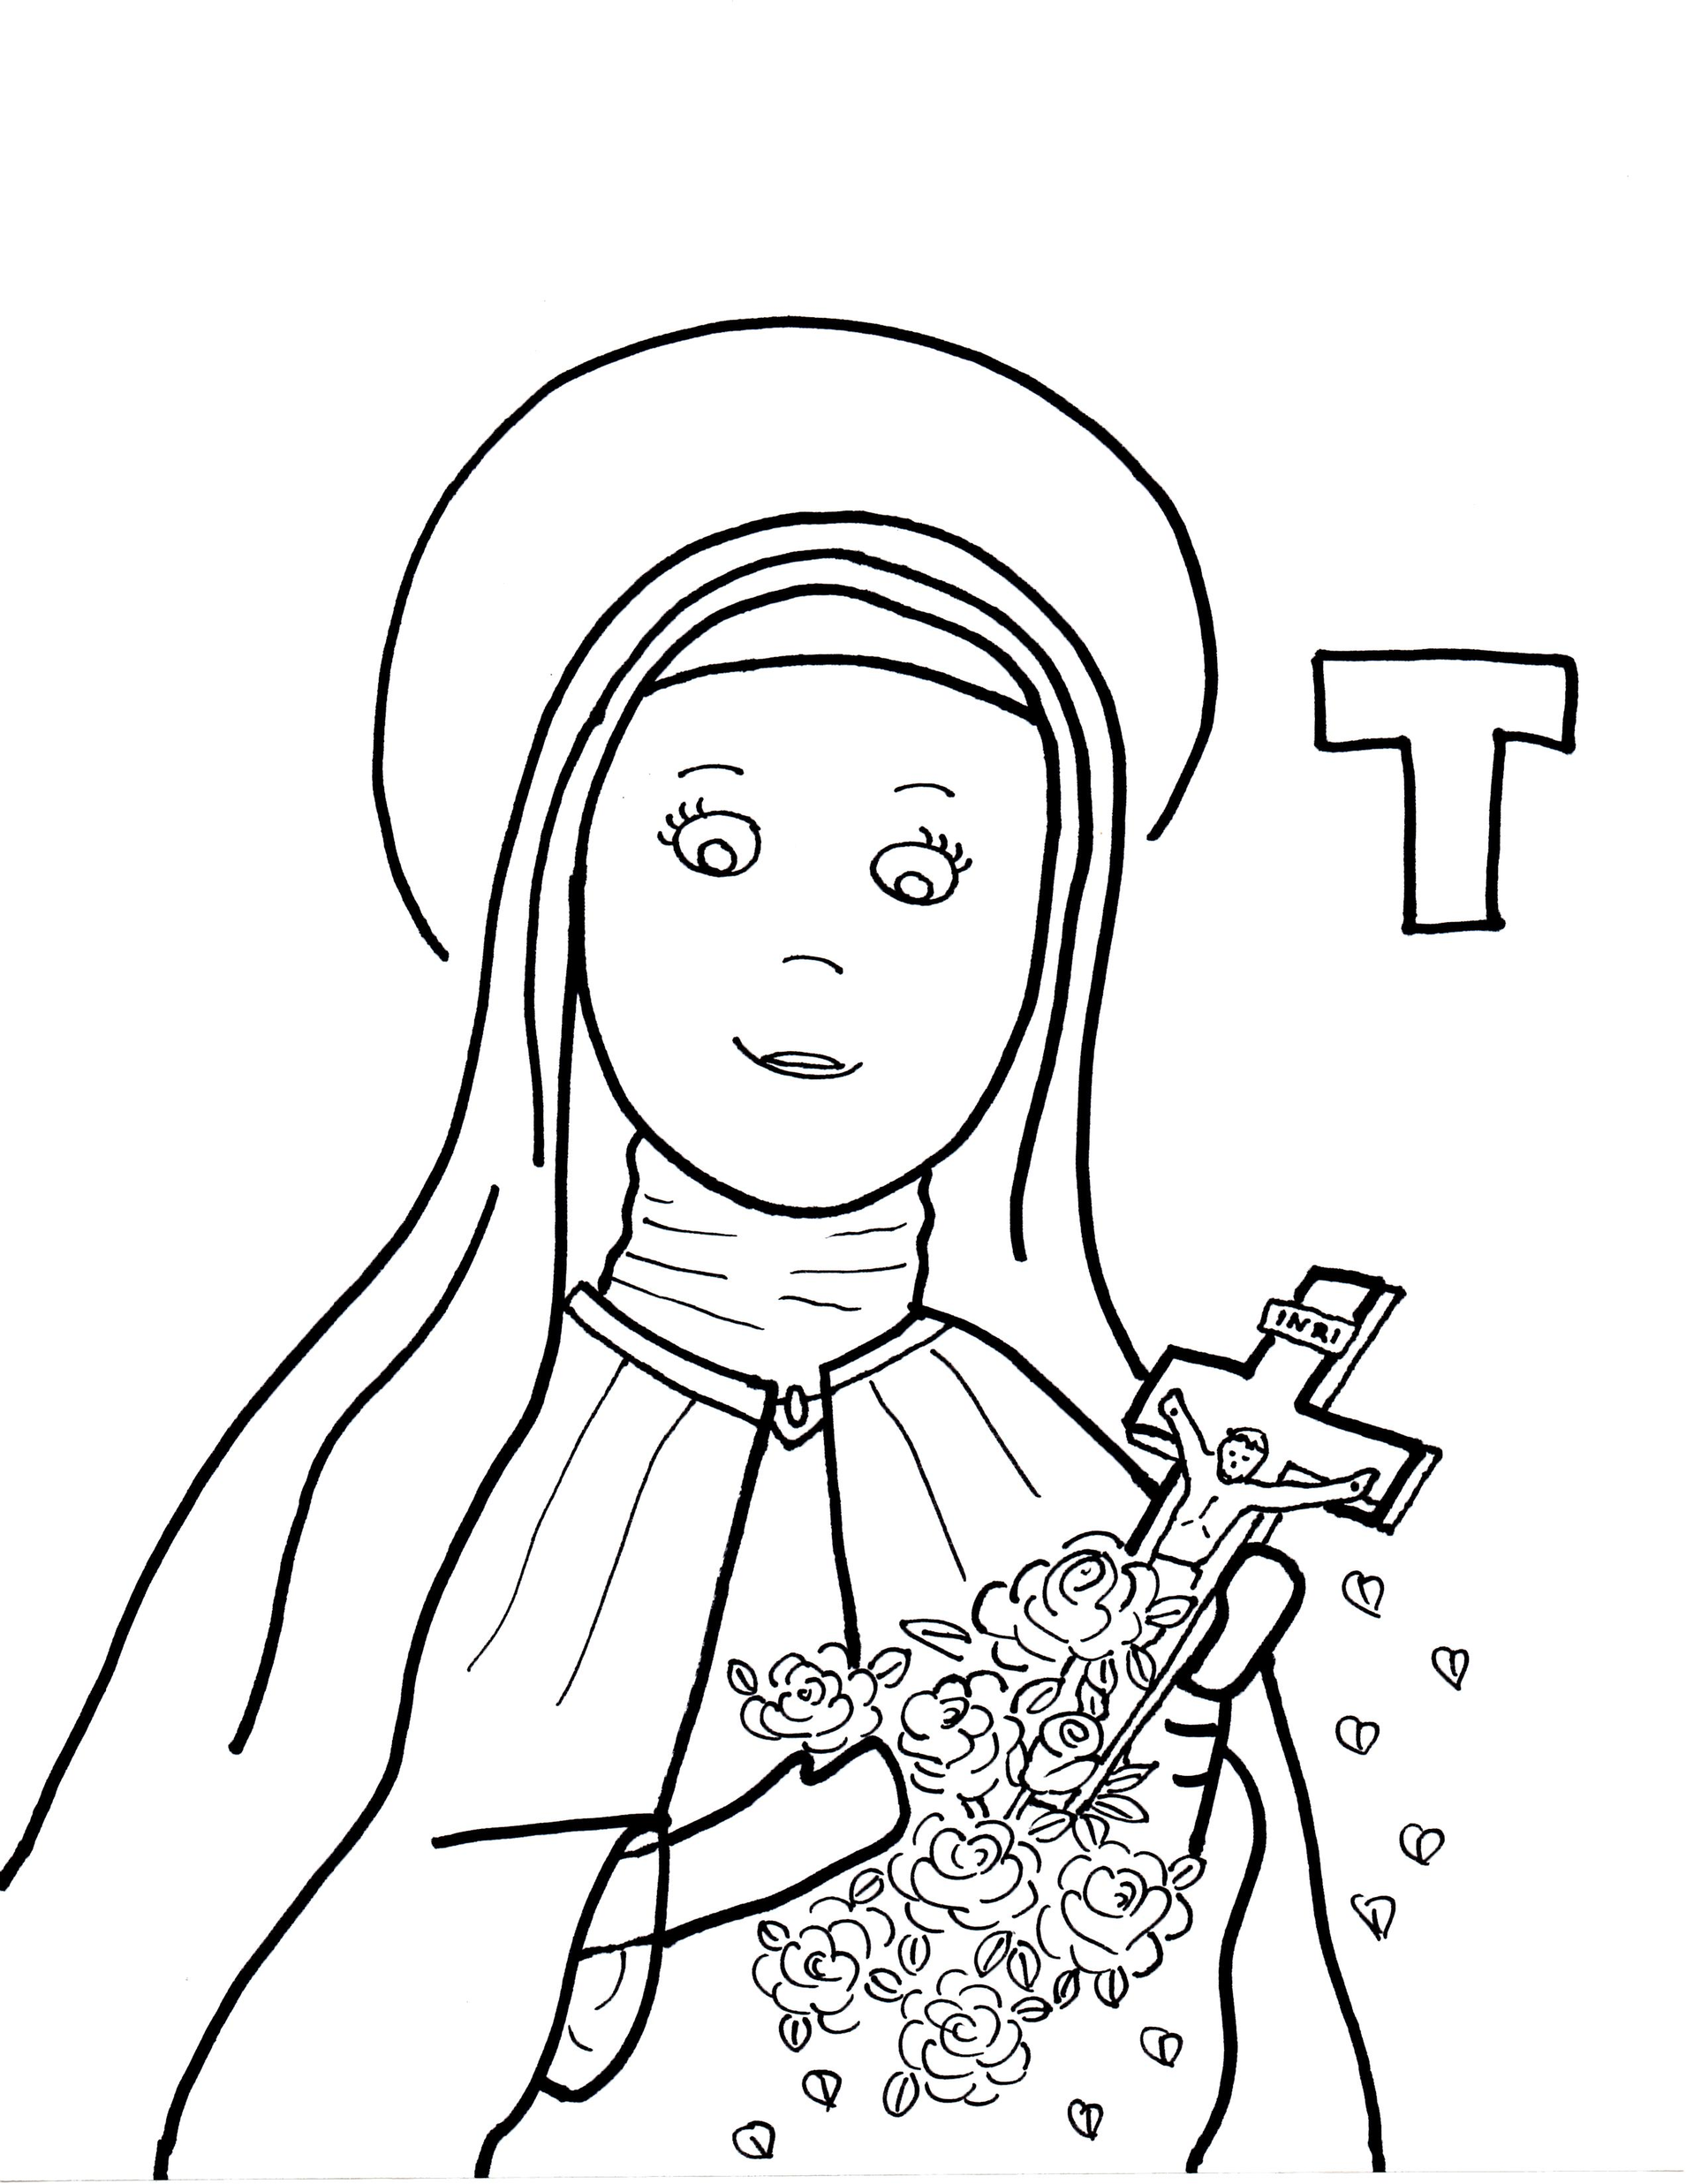 St Therese Of Lisieux Coloring Page 2